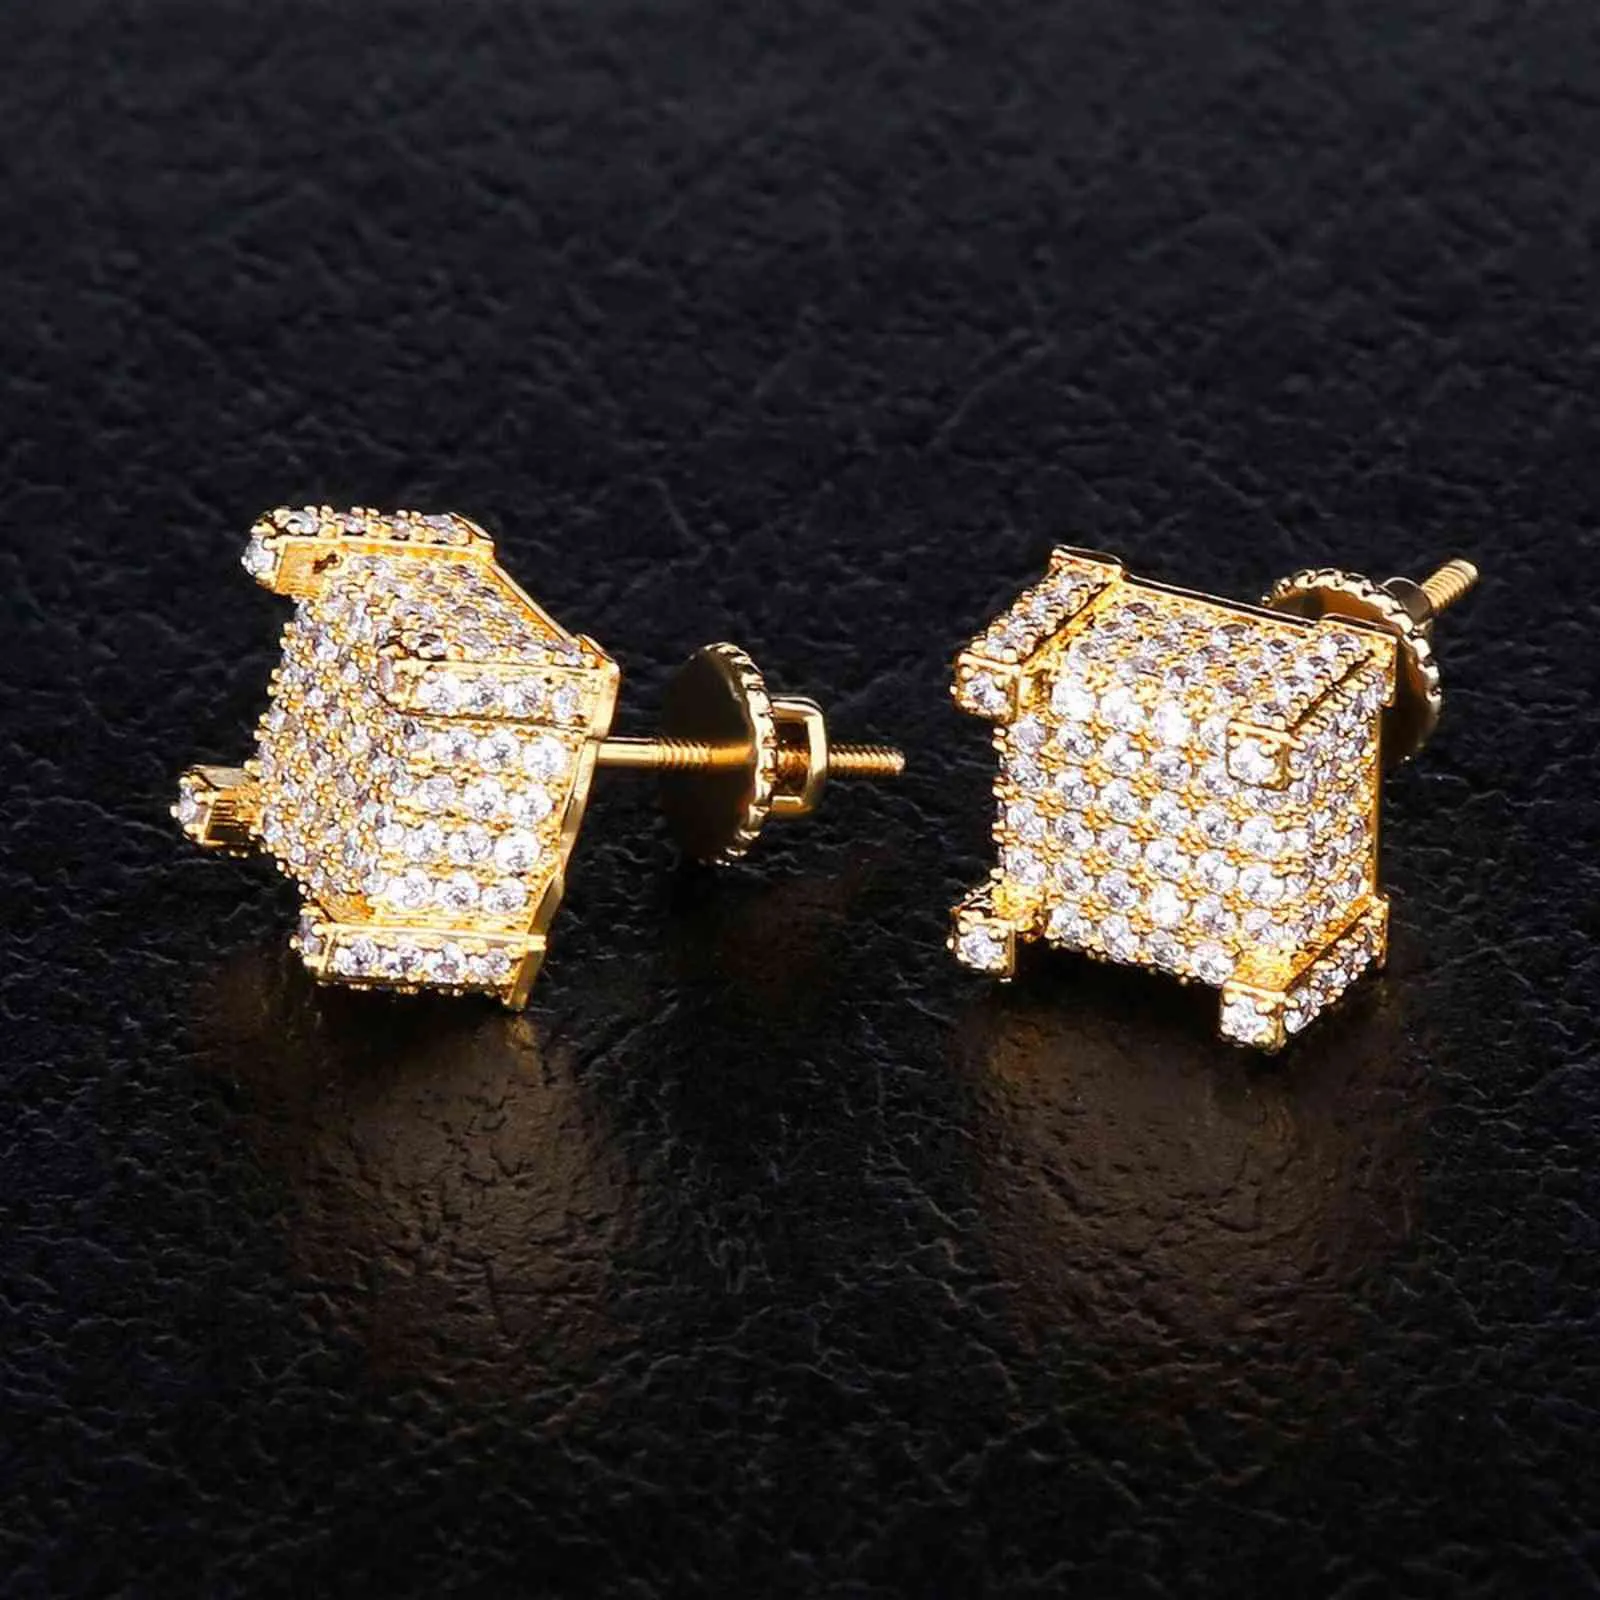 KRKC&CO Micro Pave Gold Iced Out 3D CZ Earrings Hip Hop Jewelry for // online store for Wholesale Agent in Stock